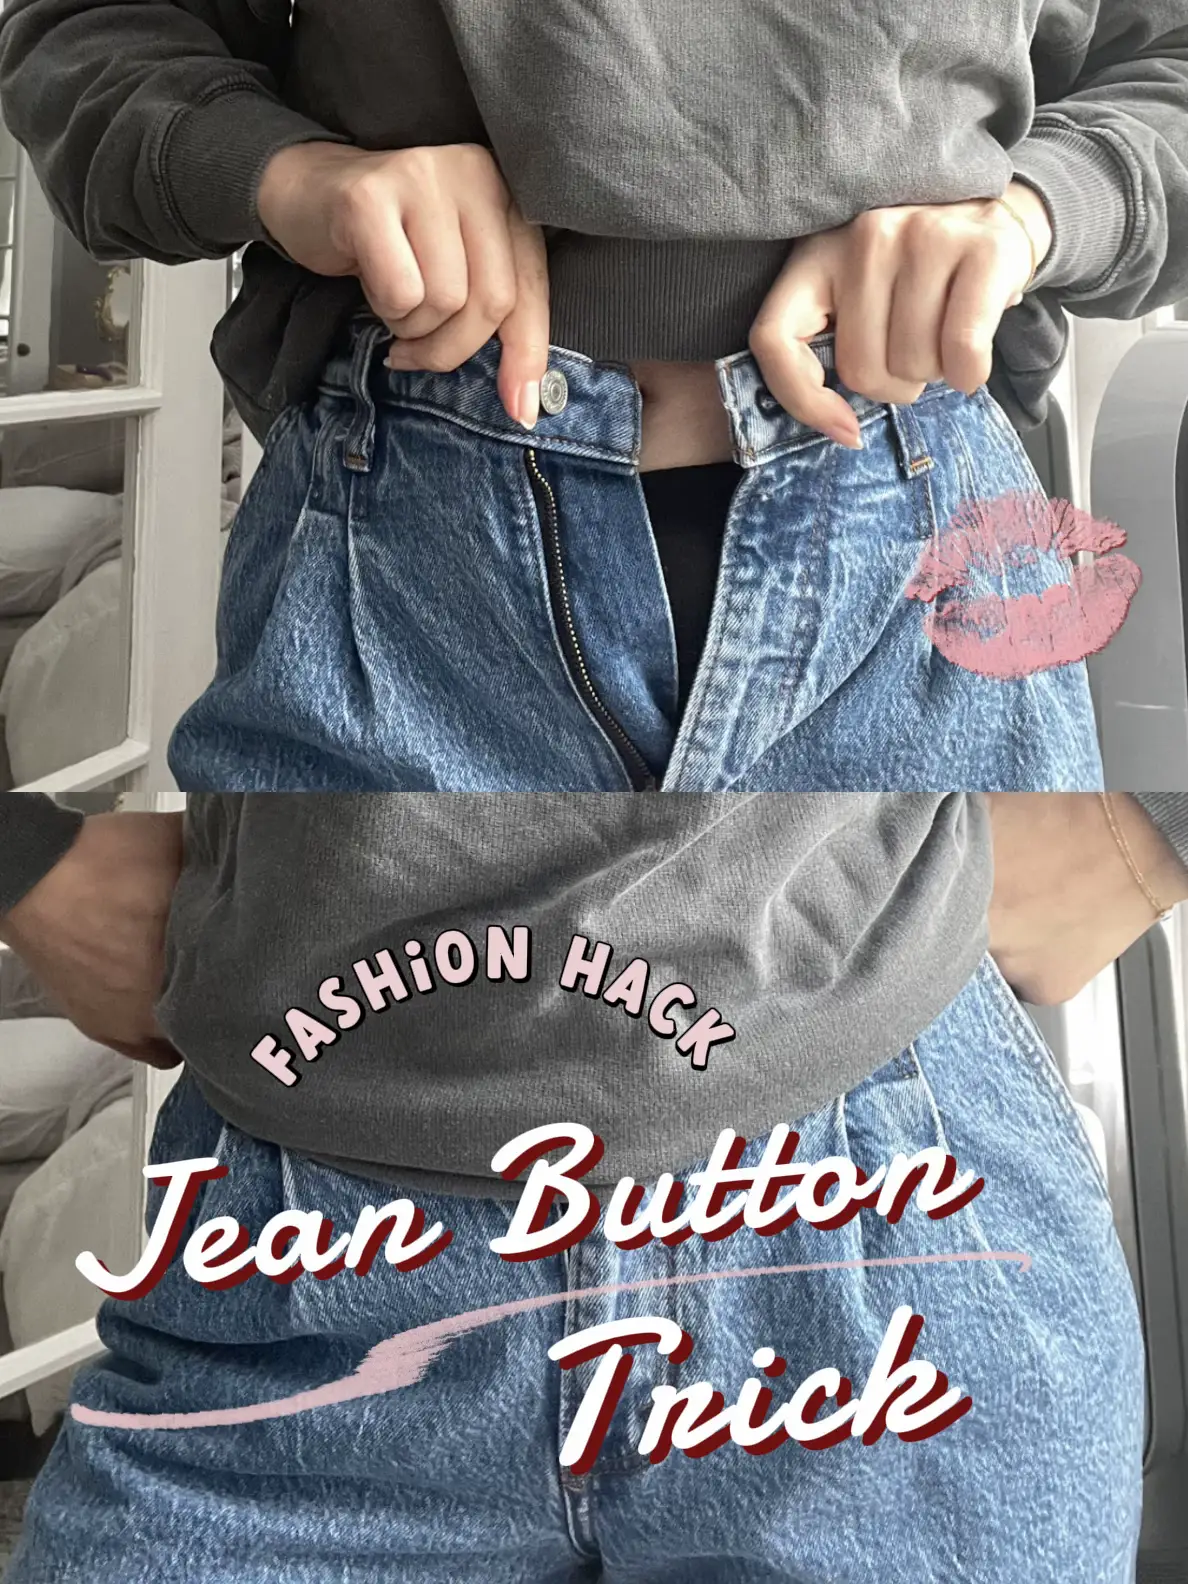 pants waist hack you need to try! 💗 Here's a quick fix for jeans tha, Jeans Hacks Waist